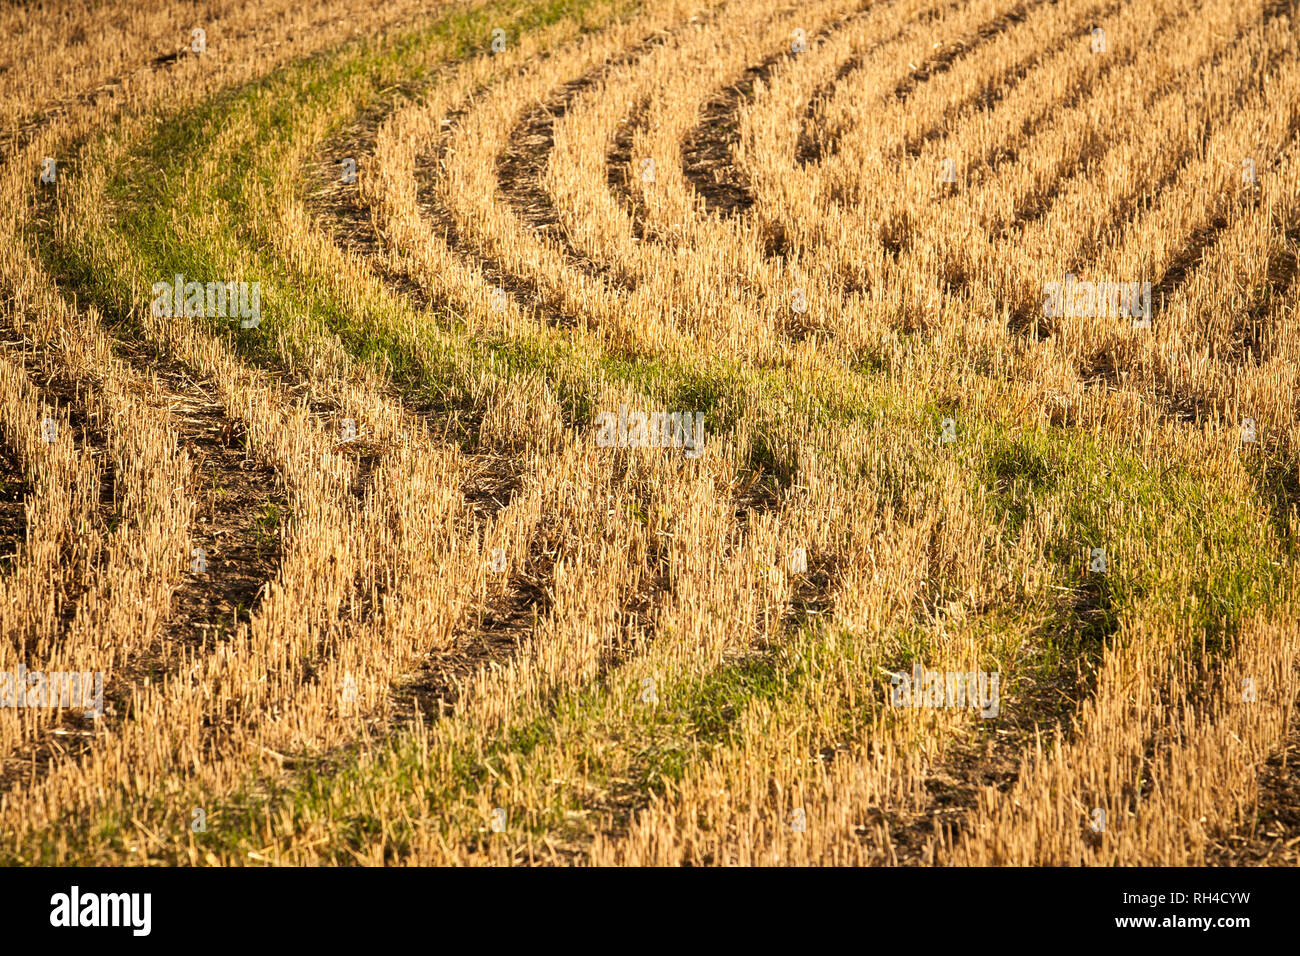 Wavy pattern in crop stubble in English field at the end of summer Stock Photo